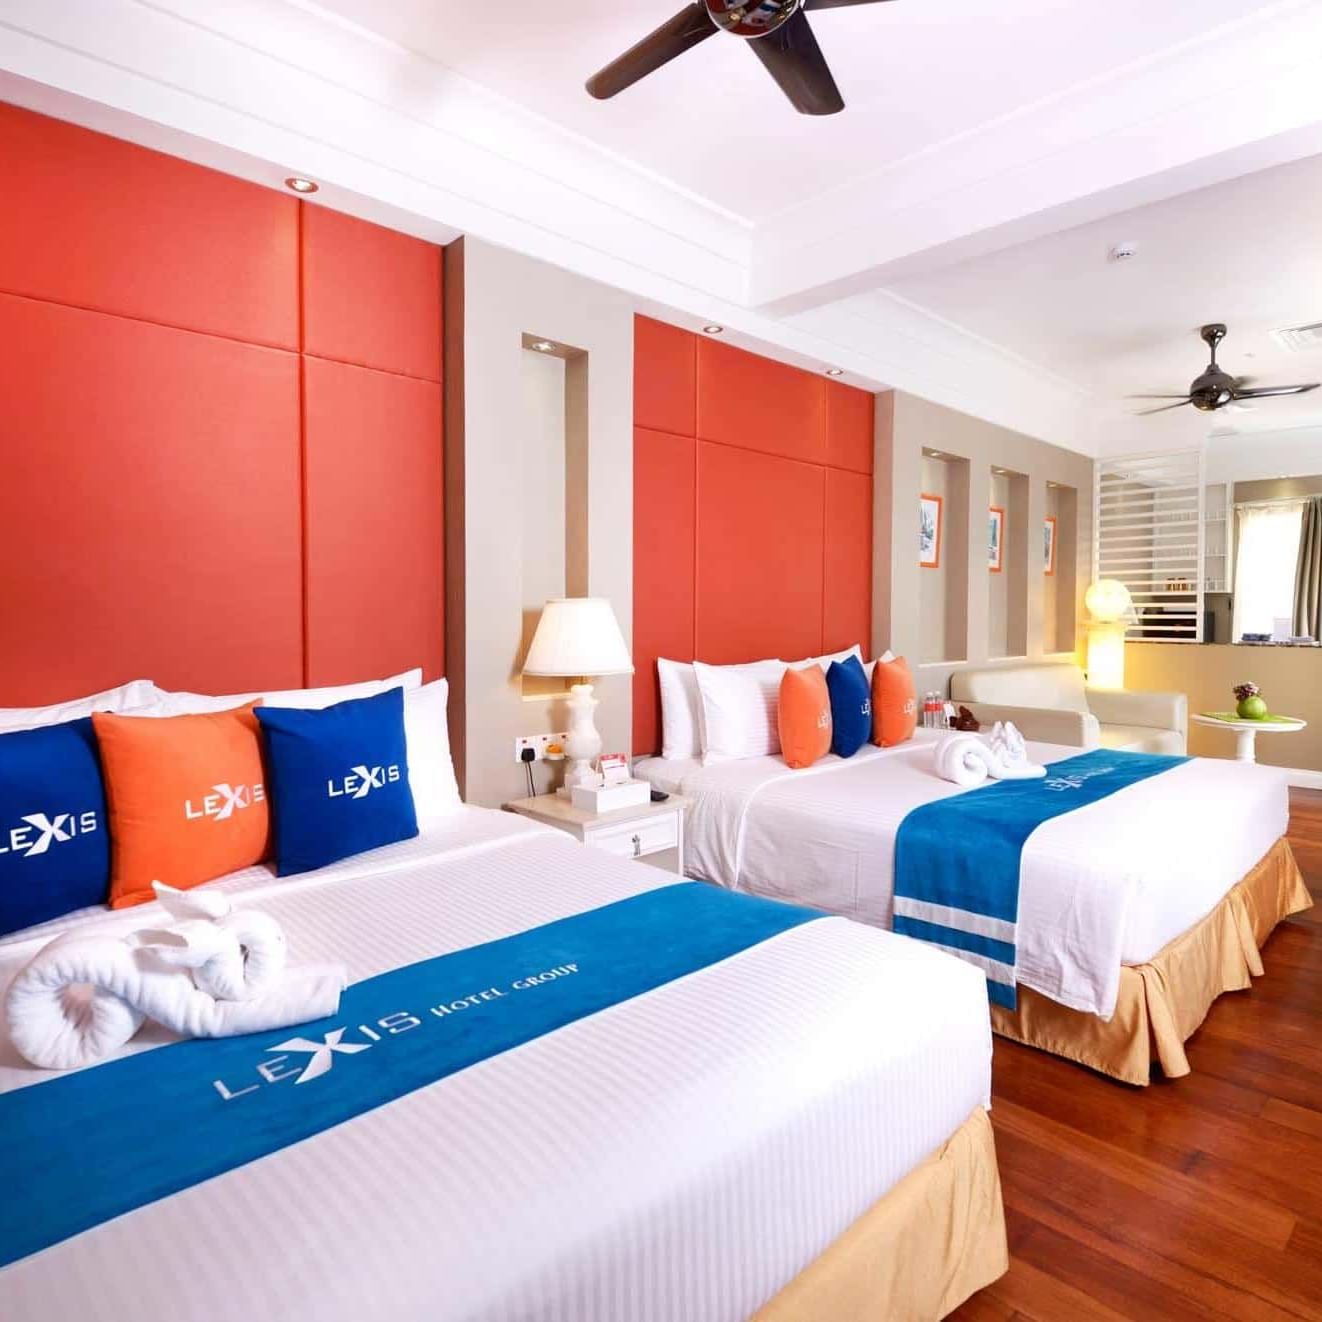 Enjoy Attractive Room Deals at Lexis Hotels & Resorts from 18th April to 10th May!